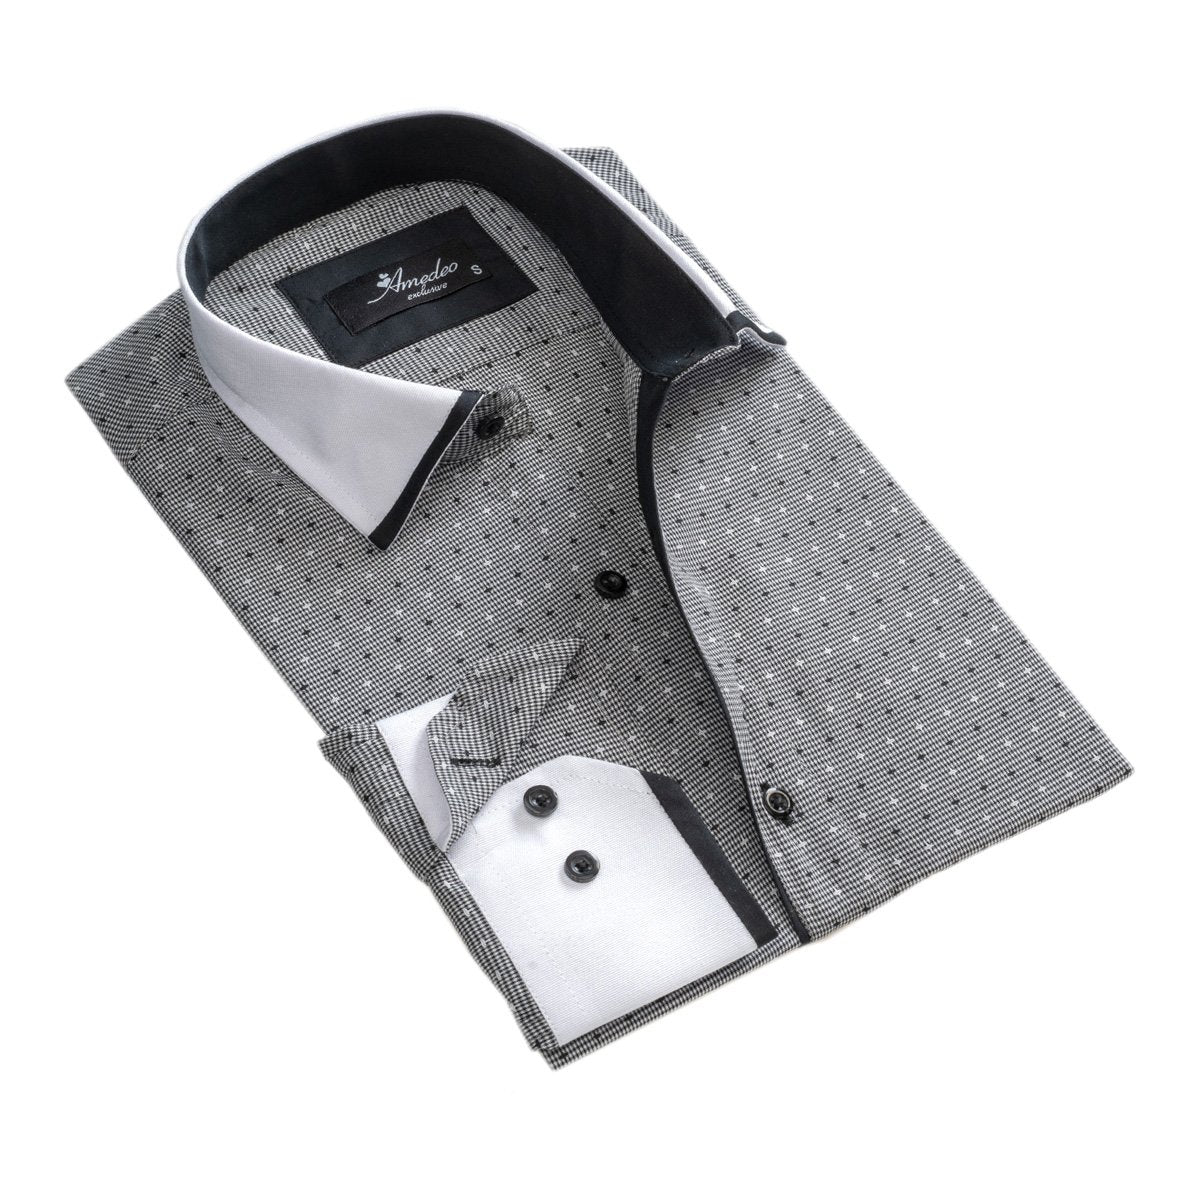 Grey Stars Mens Slim Fit Designer Dress Shirt - tailored Cotton Shirts for Work and Casual Wear - Amedeo Exclusive